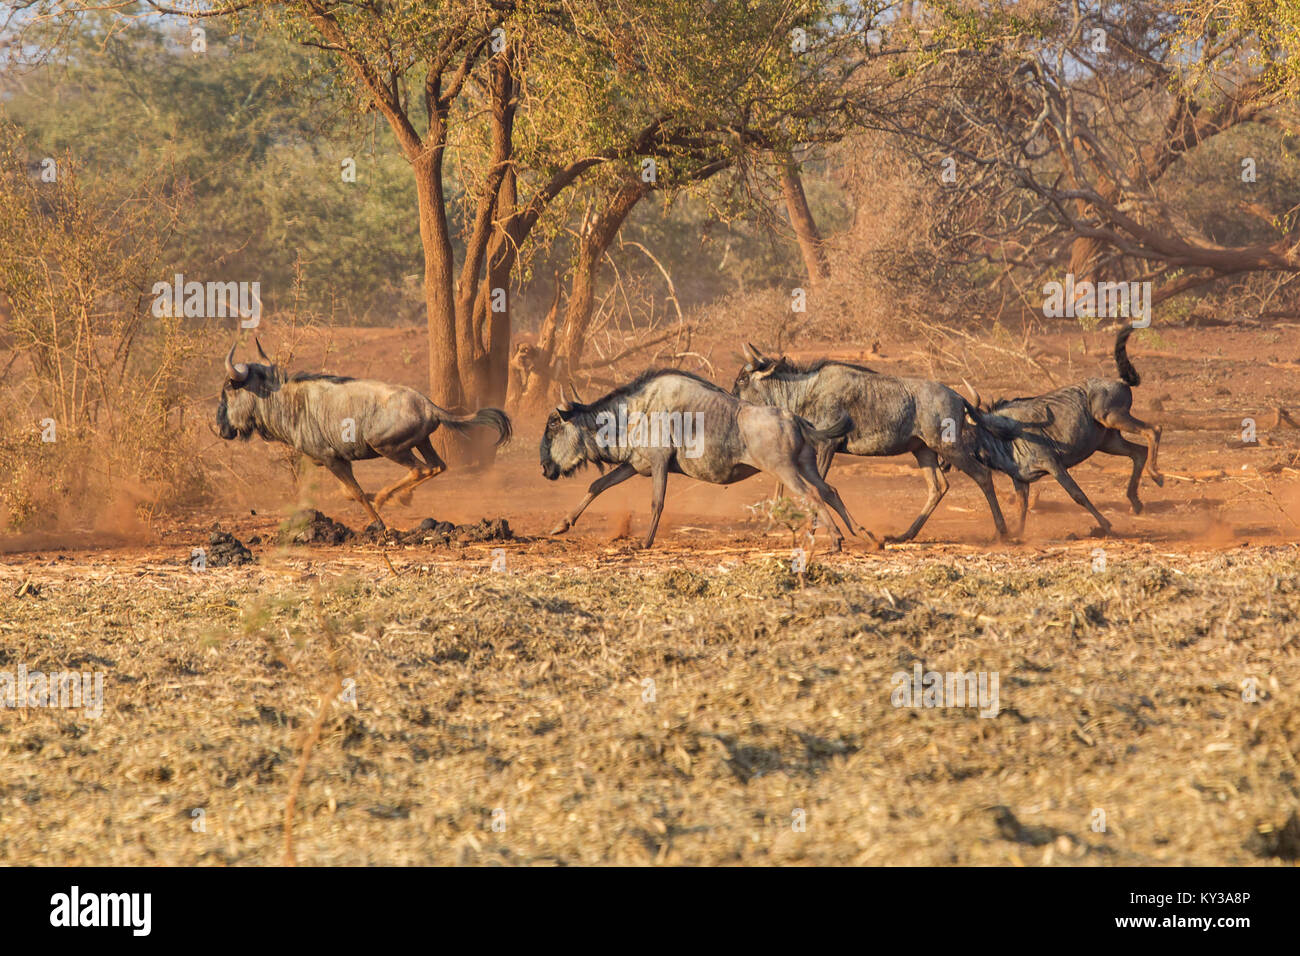 A group of Wildebeest Connochaetes taurinus running through scrubland in South Africa Stock Photo